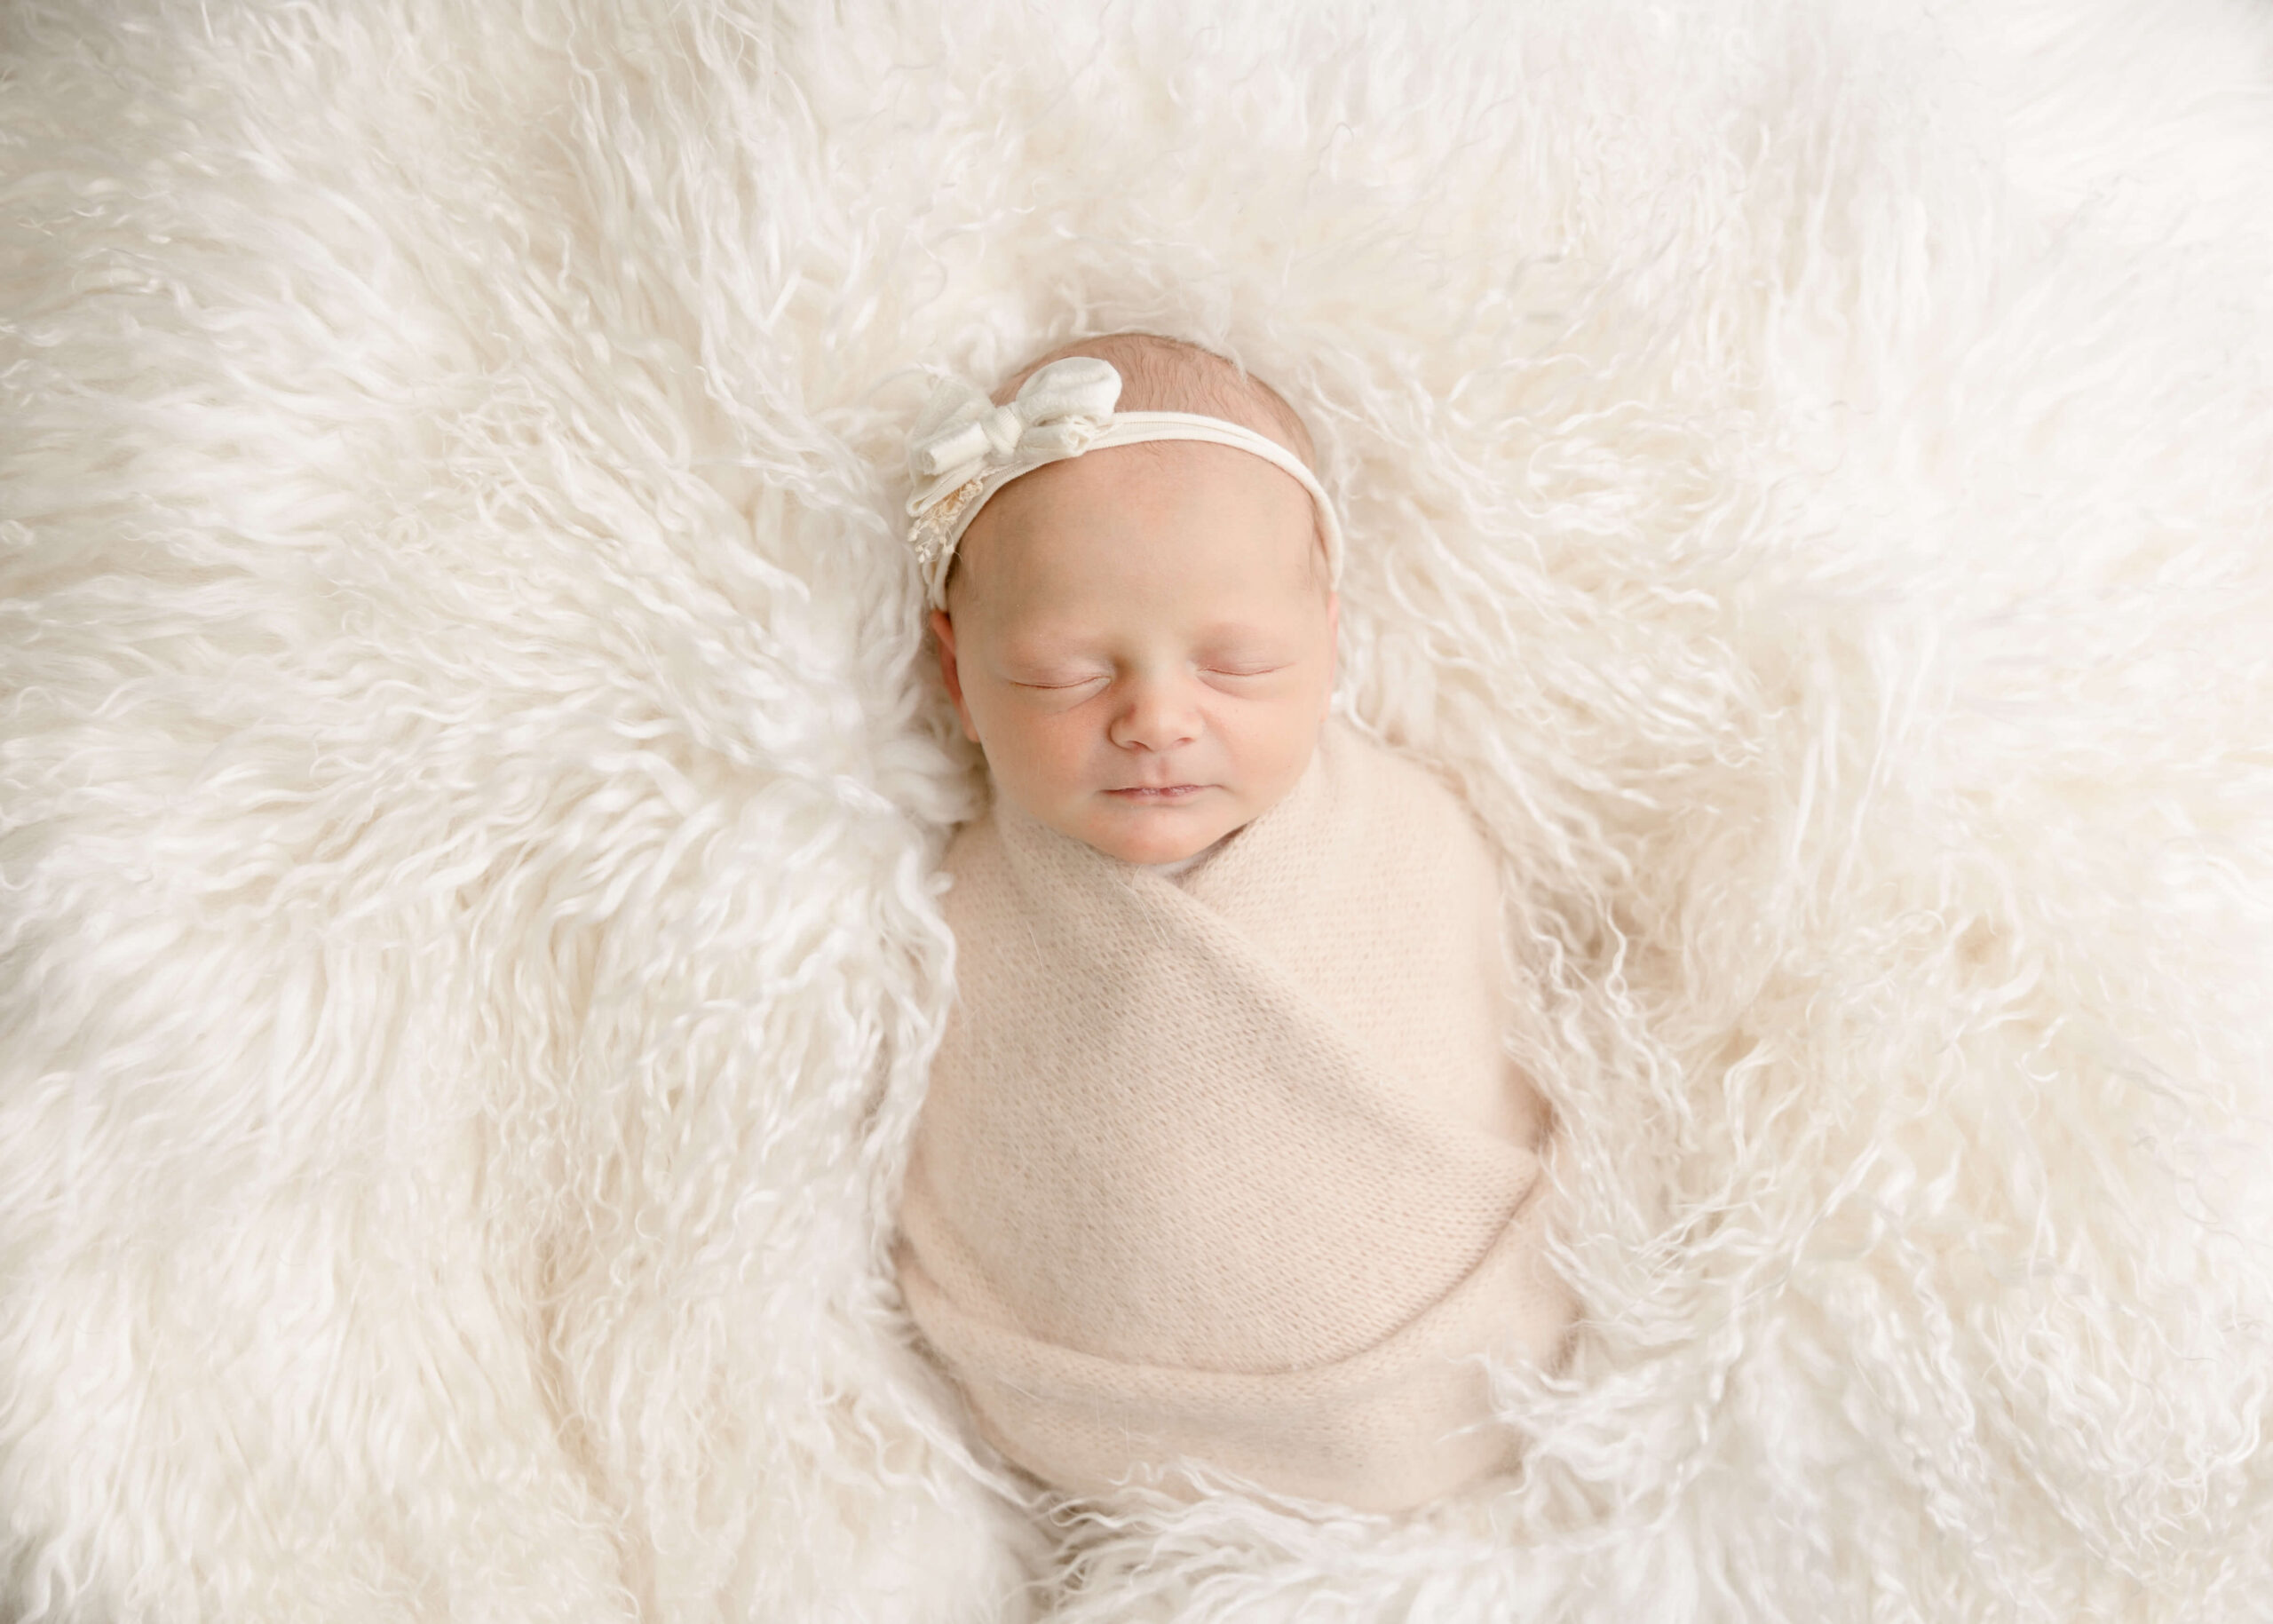 Baby girl wrapped in studio newborn session by Ashley Nicole.